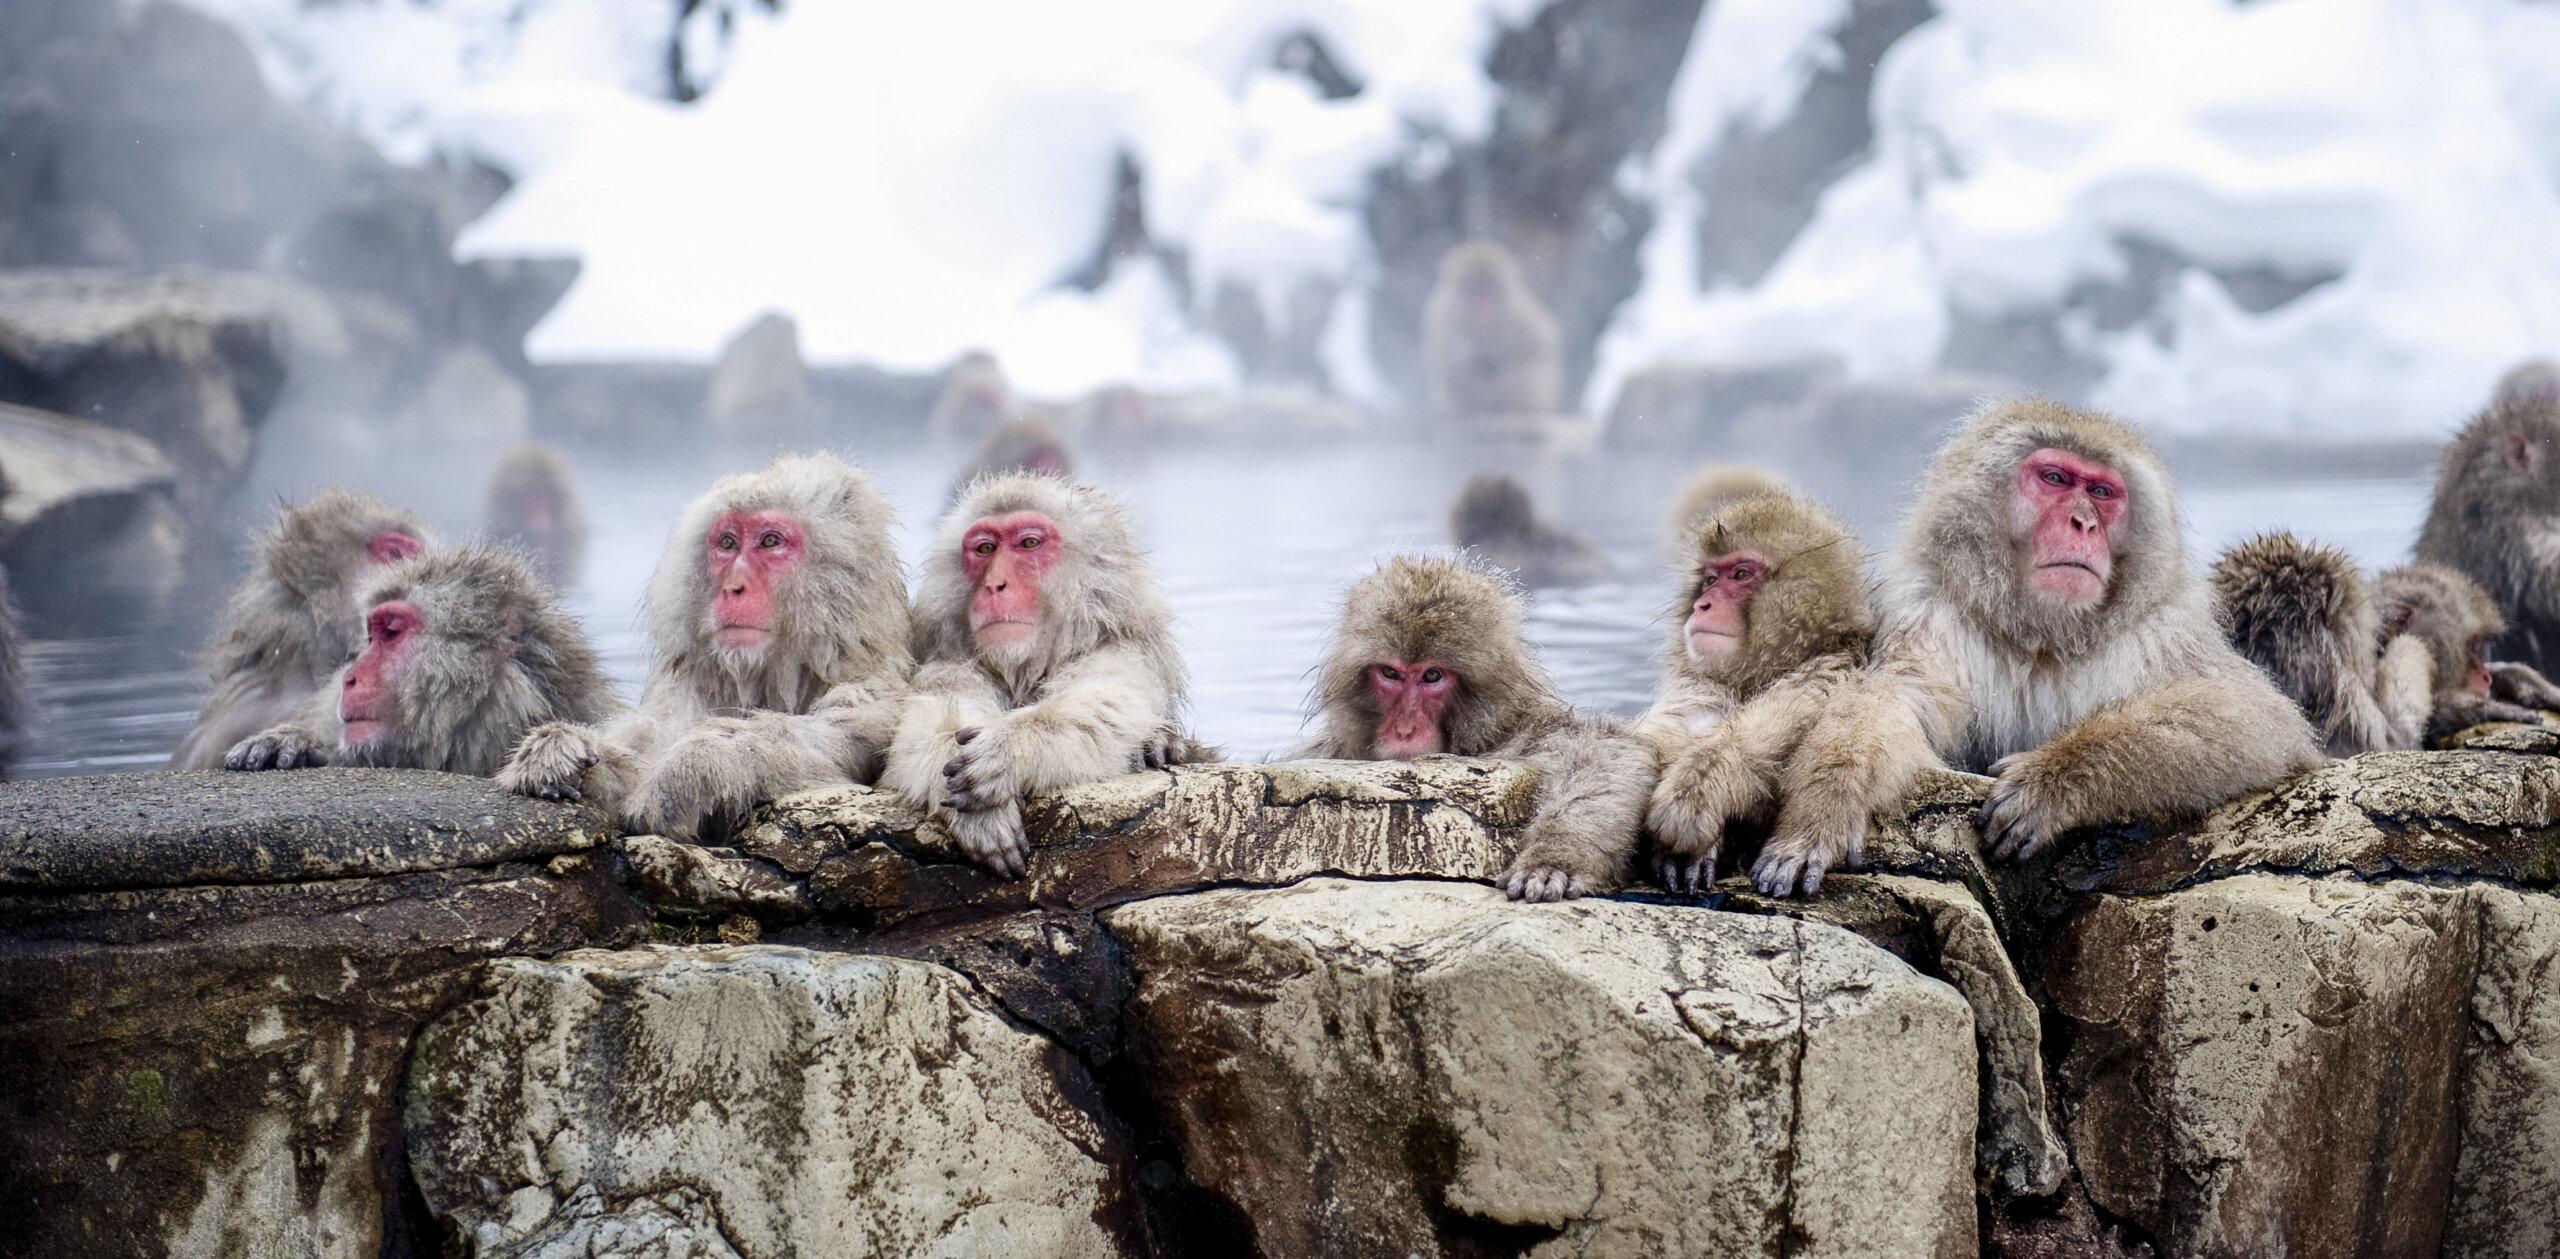 https://www.wildernesstravel.com/wp-content/uploads/2023/07/10-SNOWMONK-japanese-macaques-geothermal-hot-springs-yudanaka-scaled.jpg